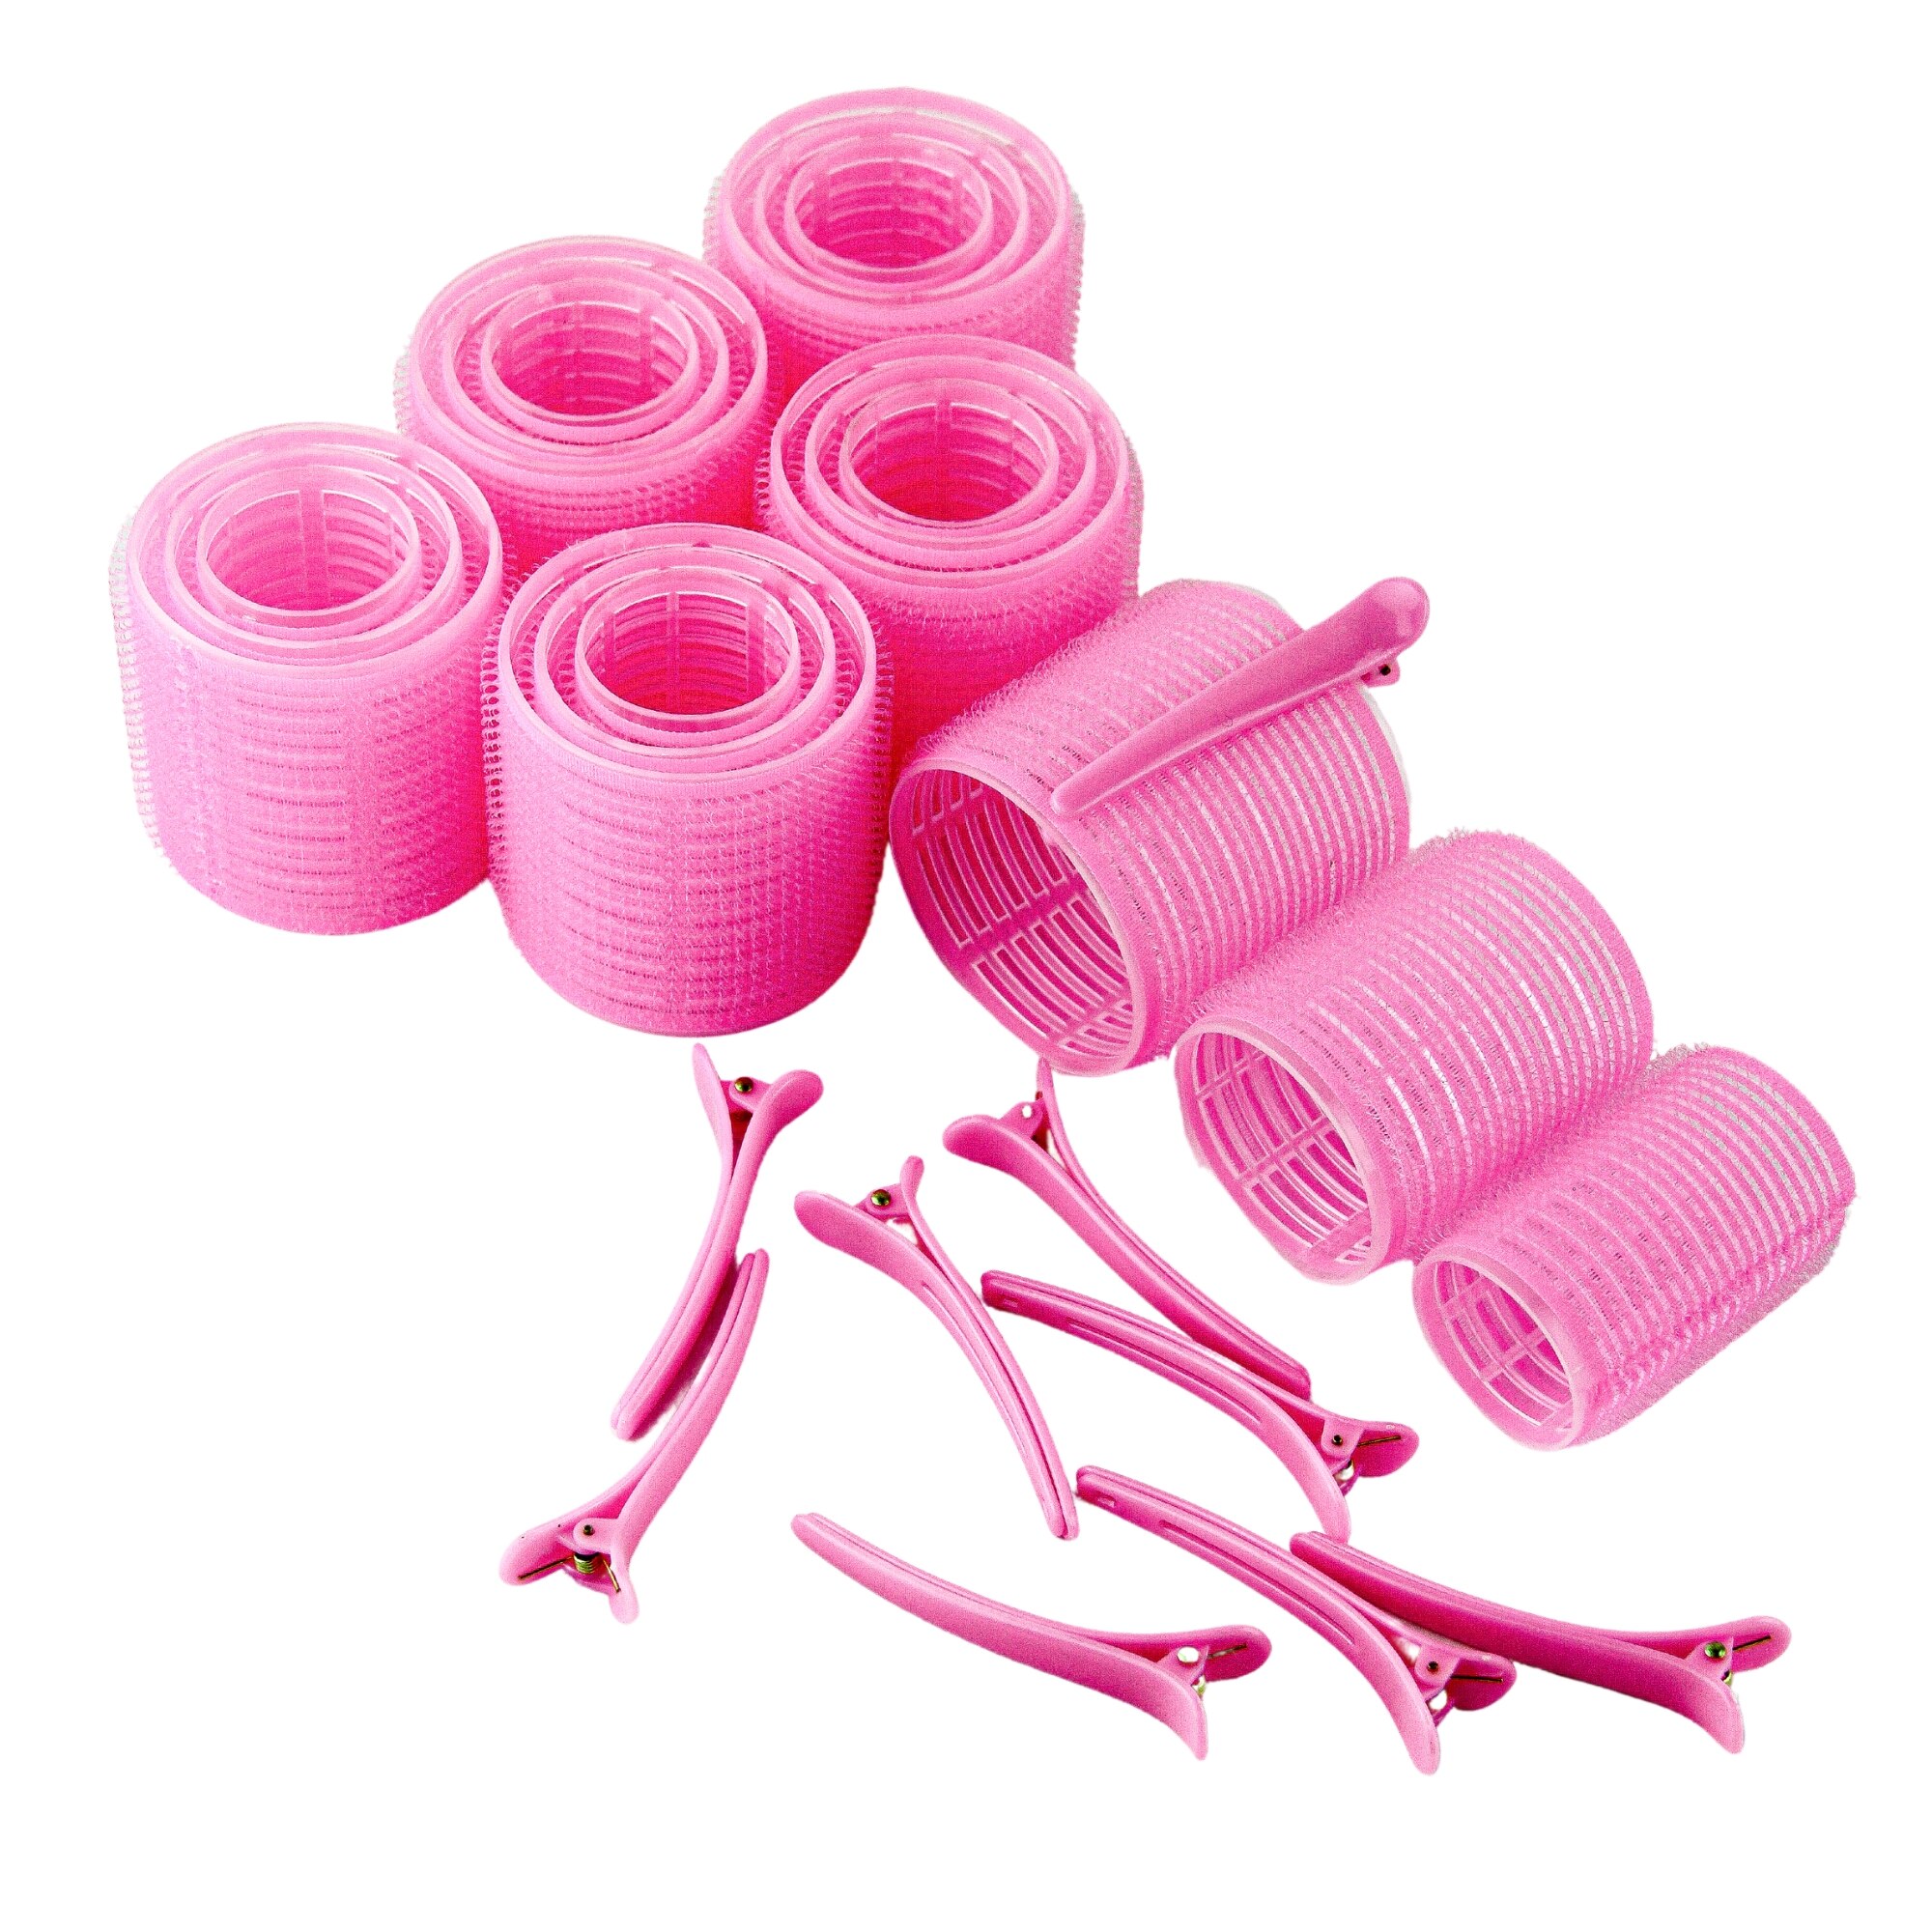 Trademark Beauty Velcro Rollers With Clips And Travel Bag , CVS